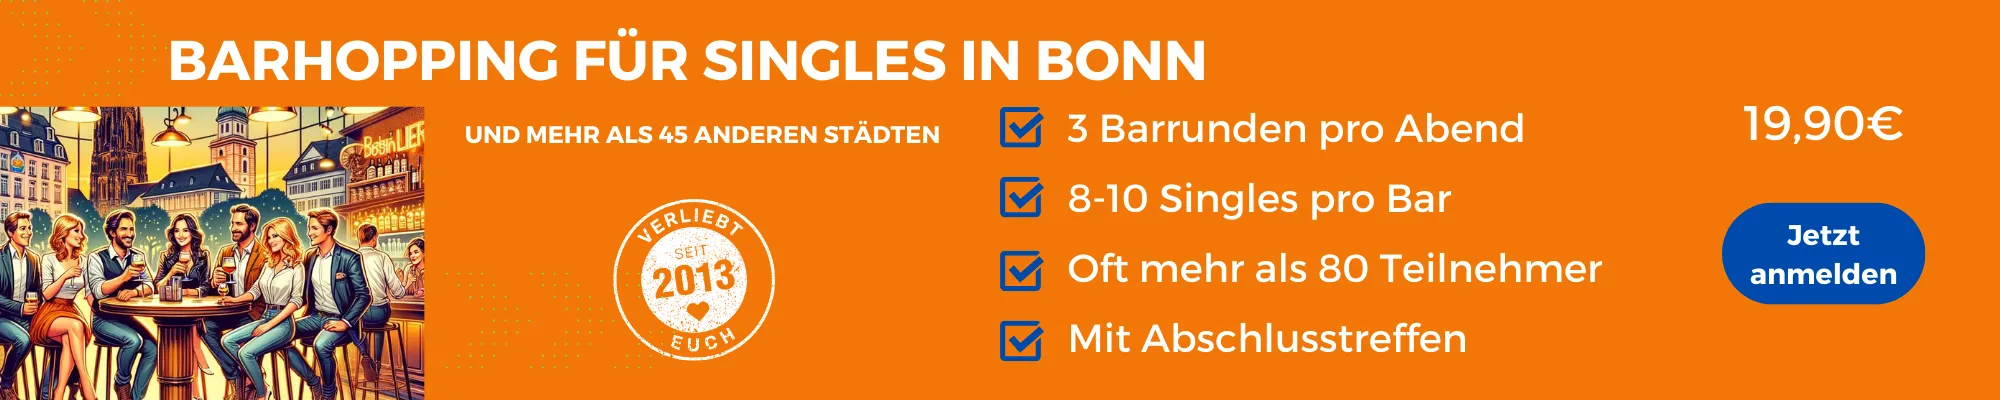 Face to Face Dating Bonn: Barhopping für Singles